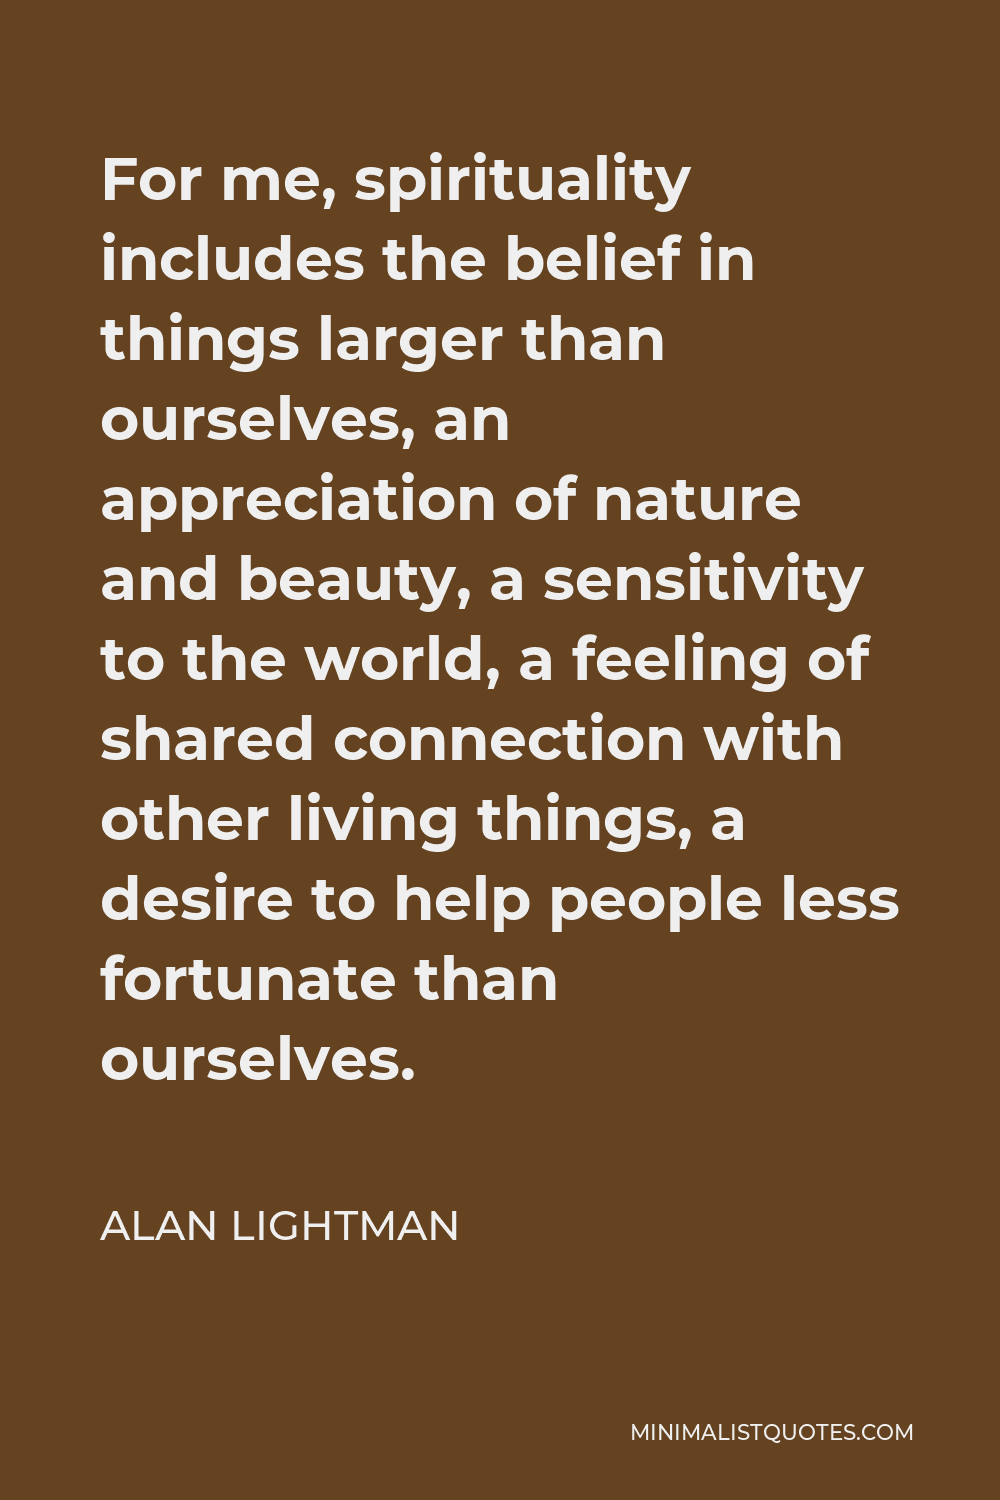 Alan Lightman Quote - For me, spirituality includes the belief in things larger than ourselves, an appreciation of nature and beauty, a sensitivity to the world, a feeling of shared connection with other living things, a desire to help people less fortunate than ourselves.